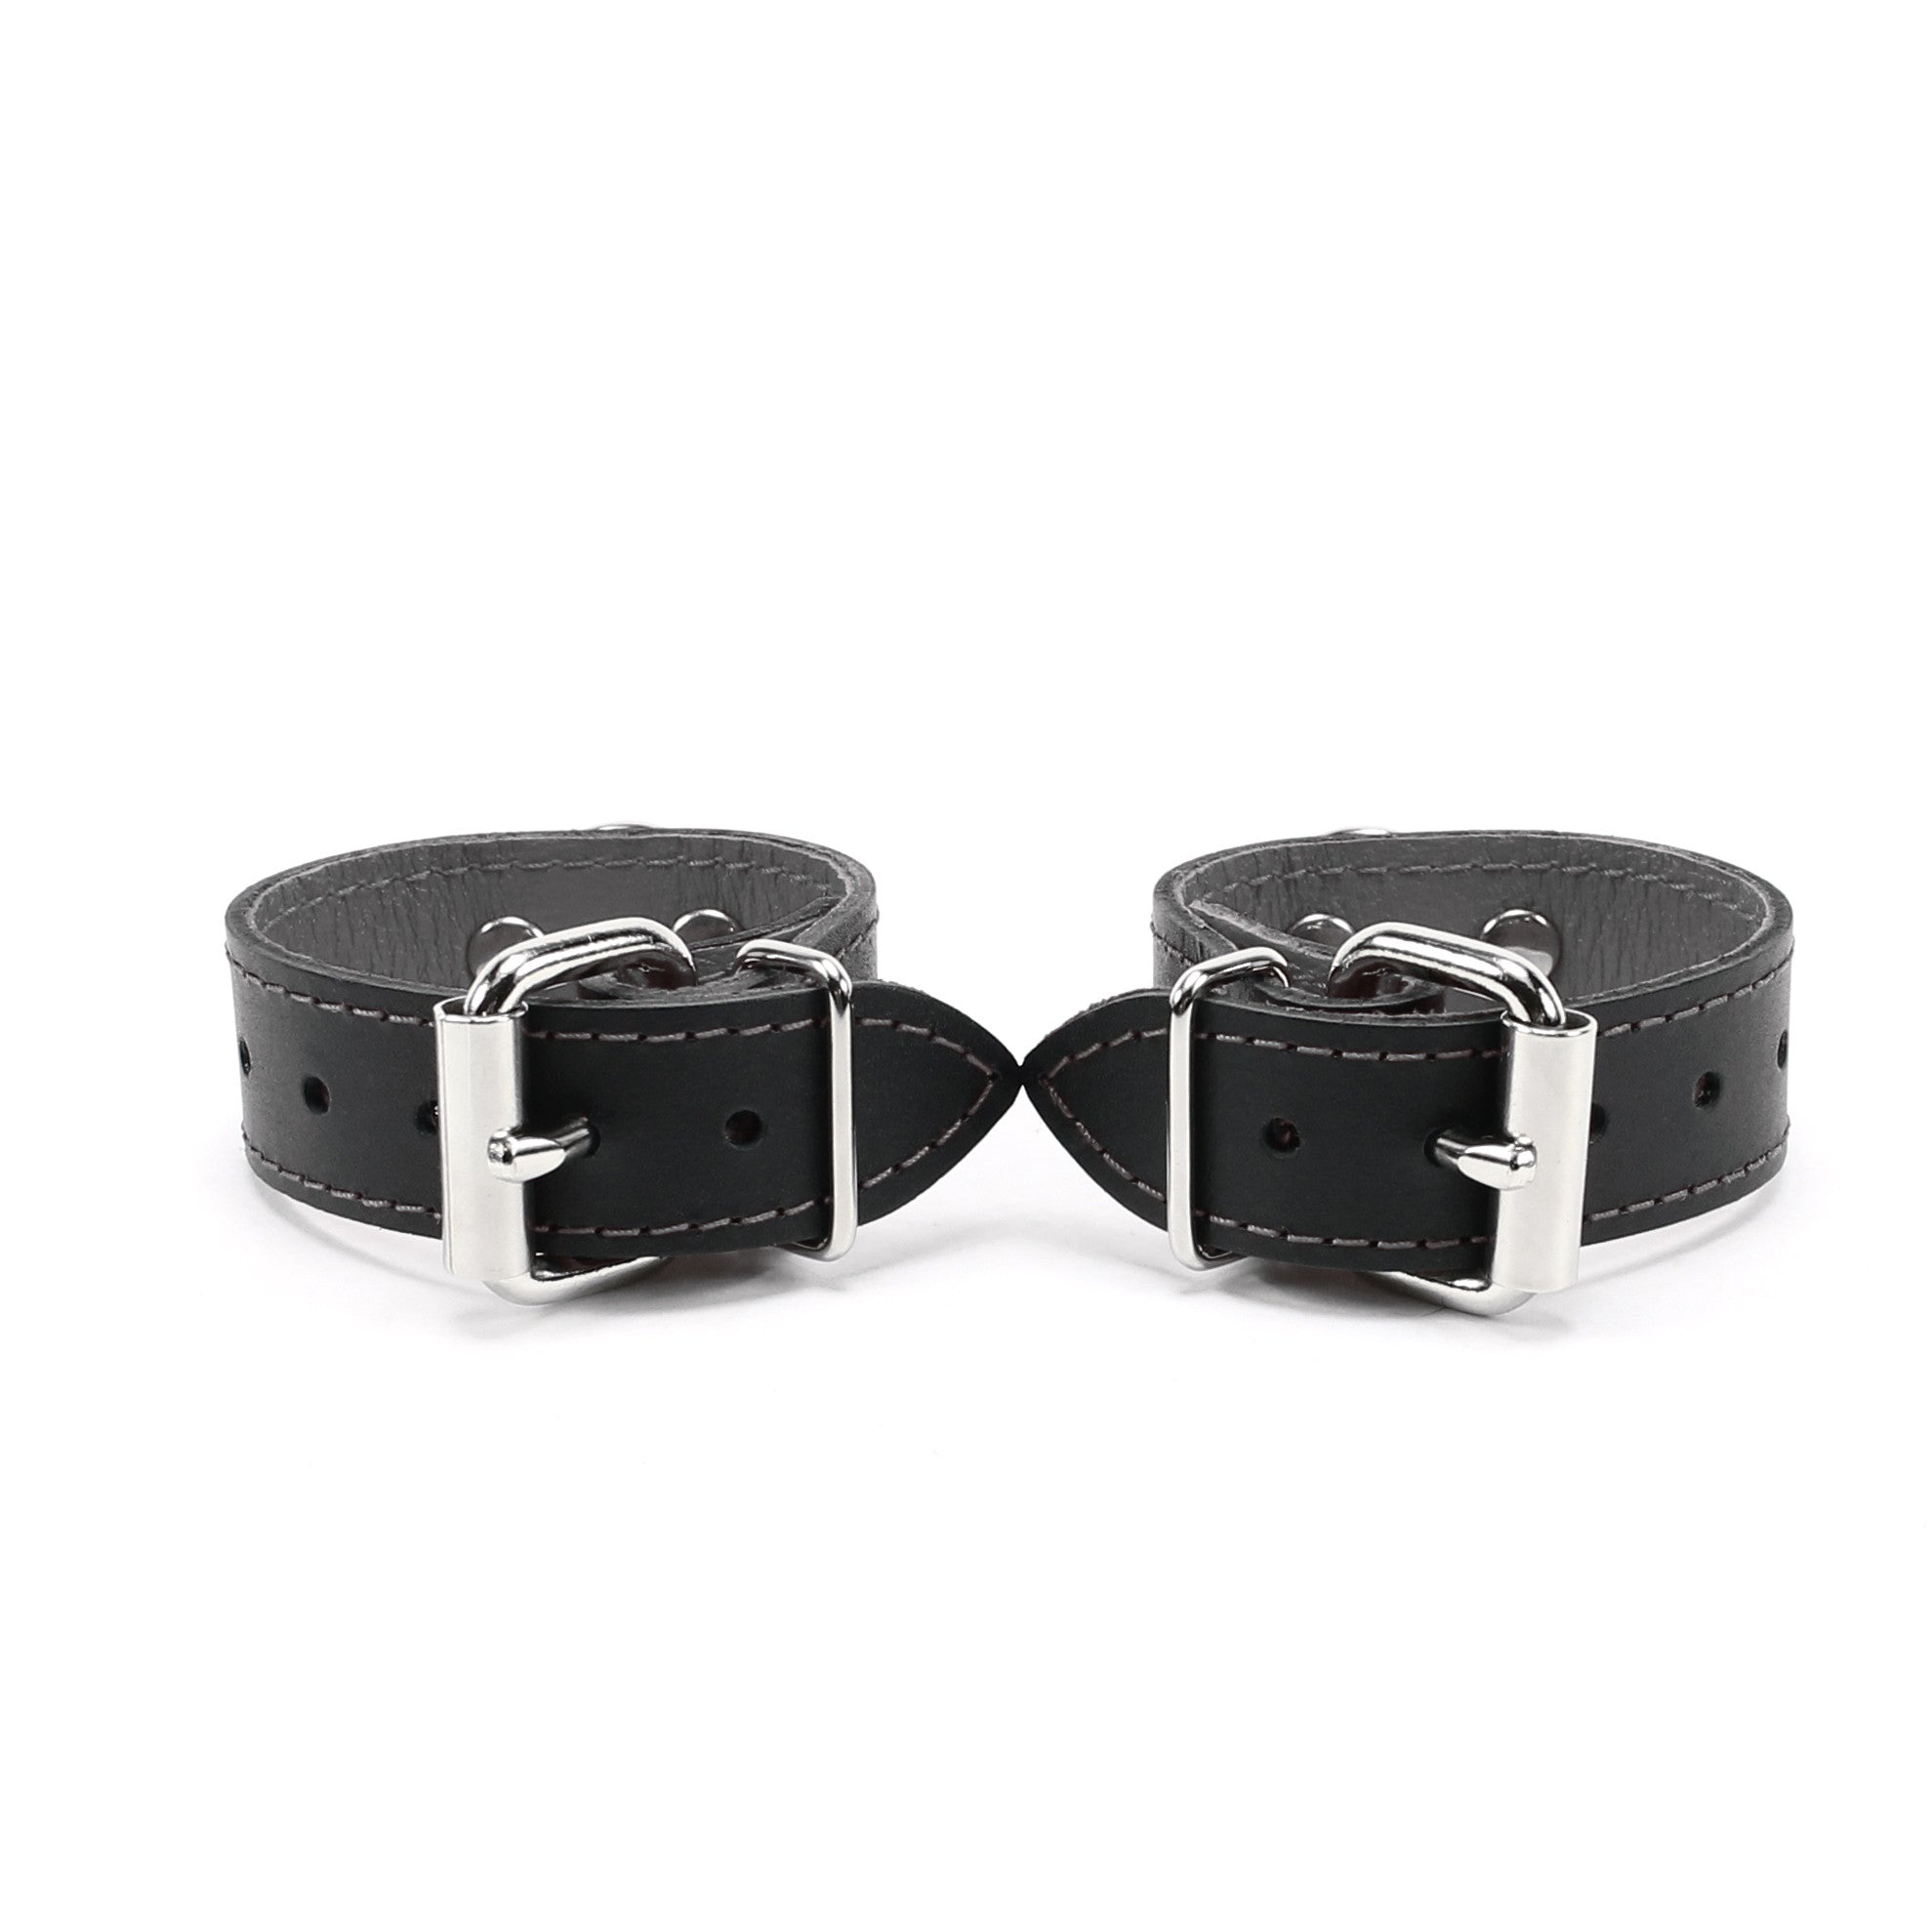 back of 1-inch wide grey padded leather BDSM cuffs